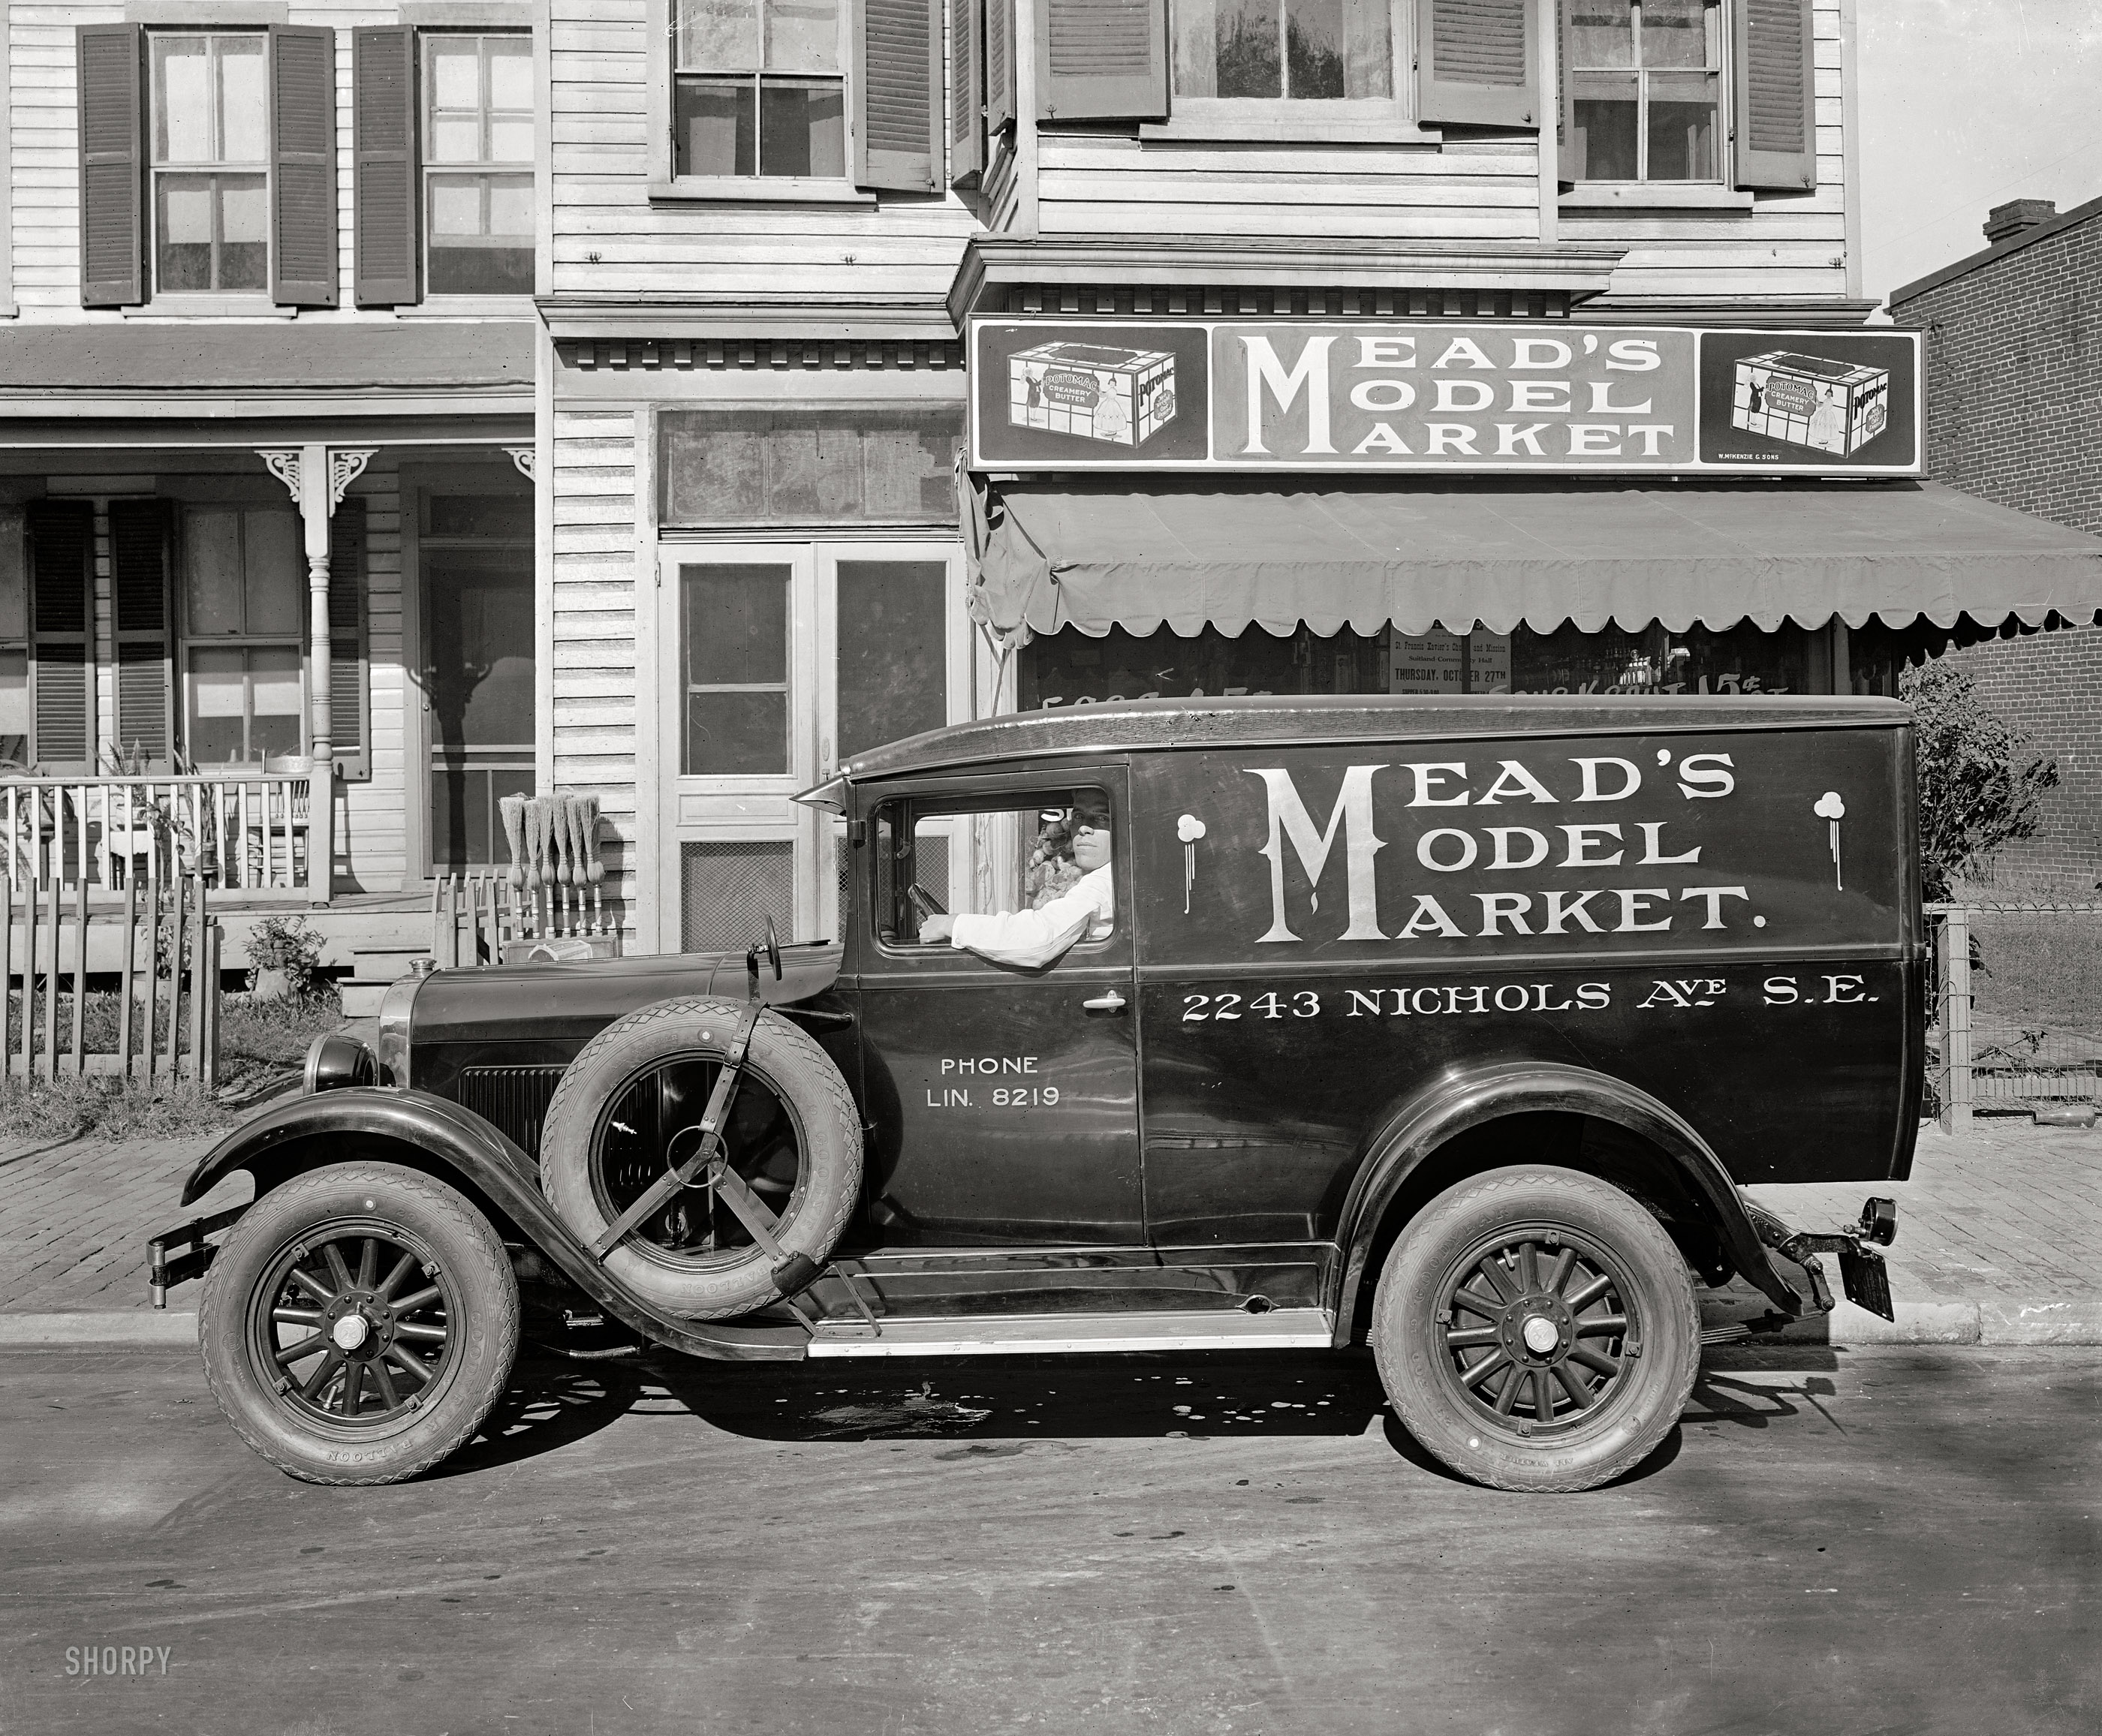 Washington, D.C., circa 1927. "Semmes Motor Company. Mead Market truck." National Photo Company Collection glass negative. View full size.